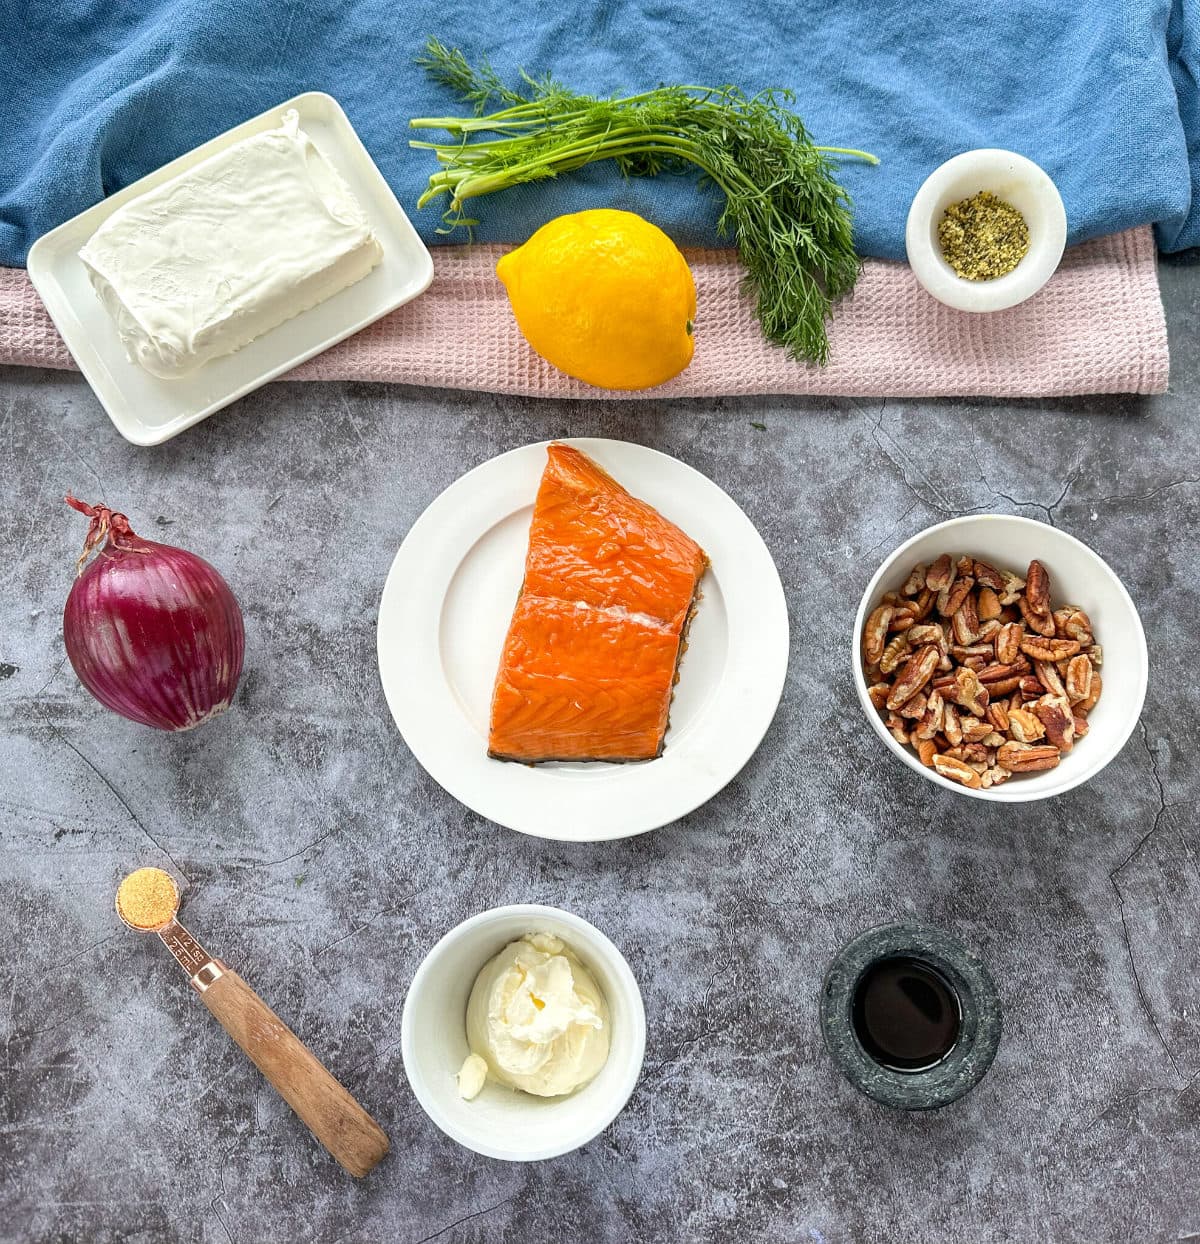 Ingredients for a Smoked Salmon Cheeseball, see recipe card for full details 